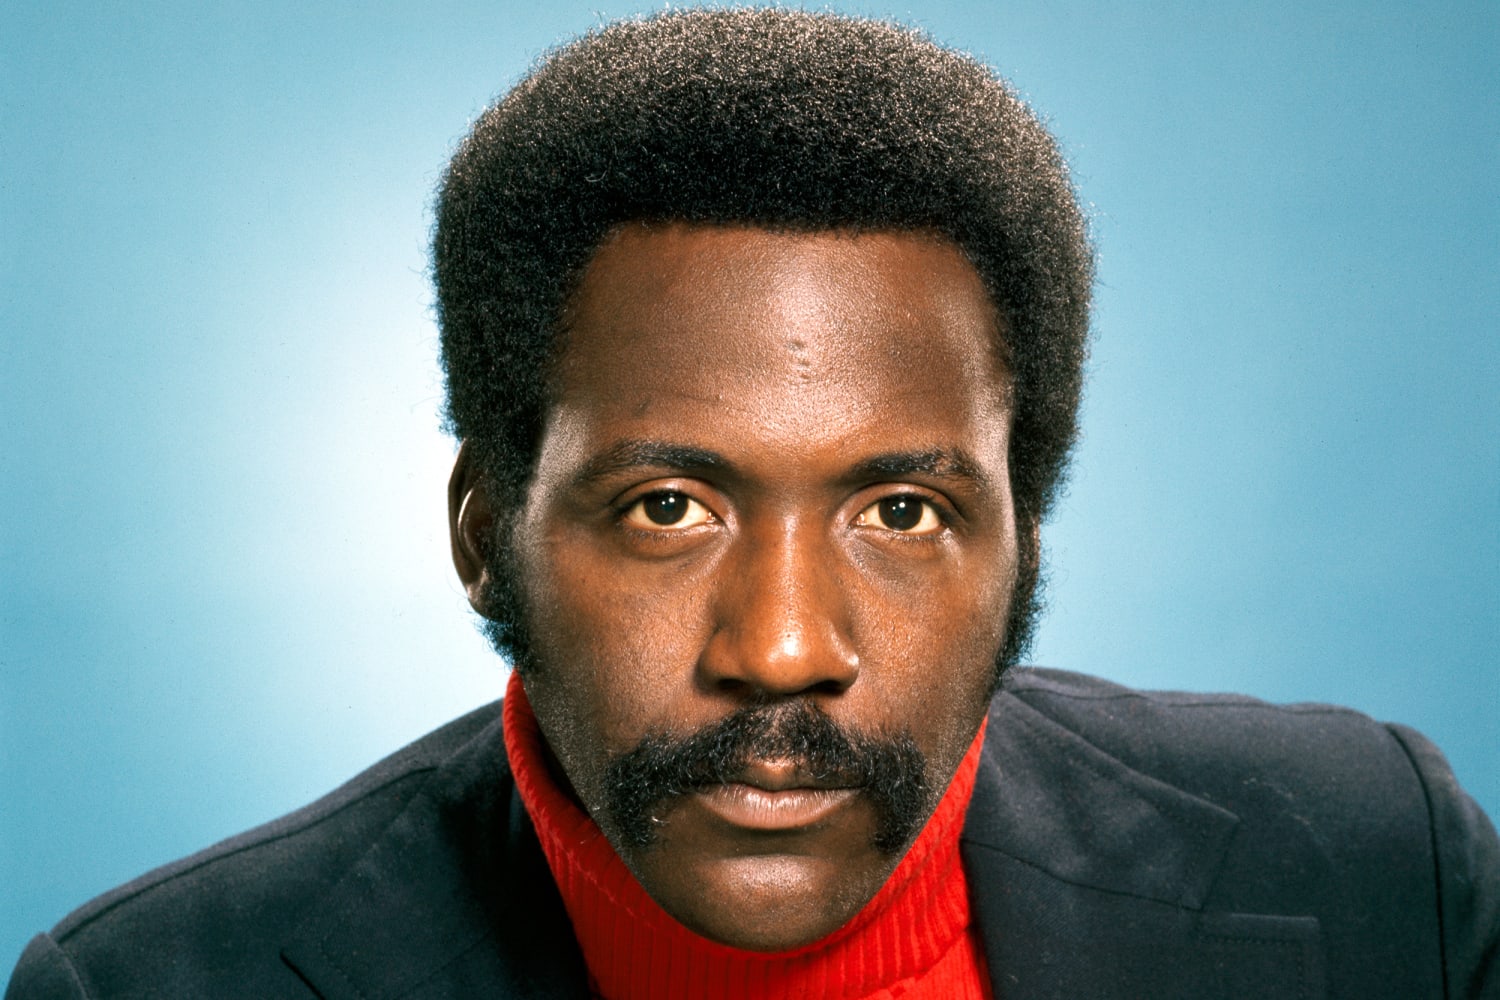 Richard Roundtree, star of the original Shaft film, has died at the age of 81